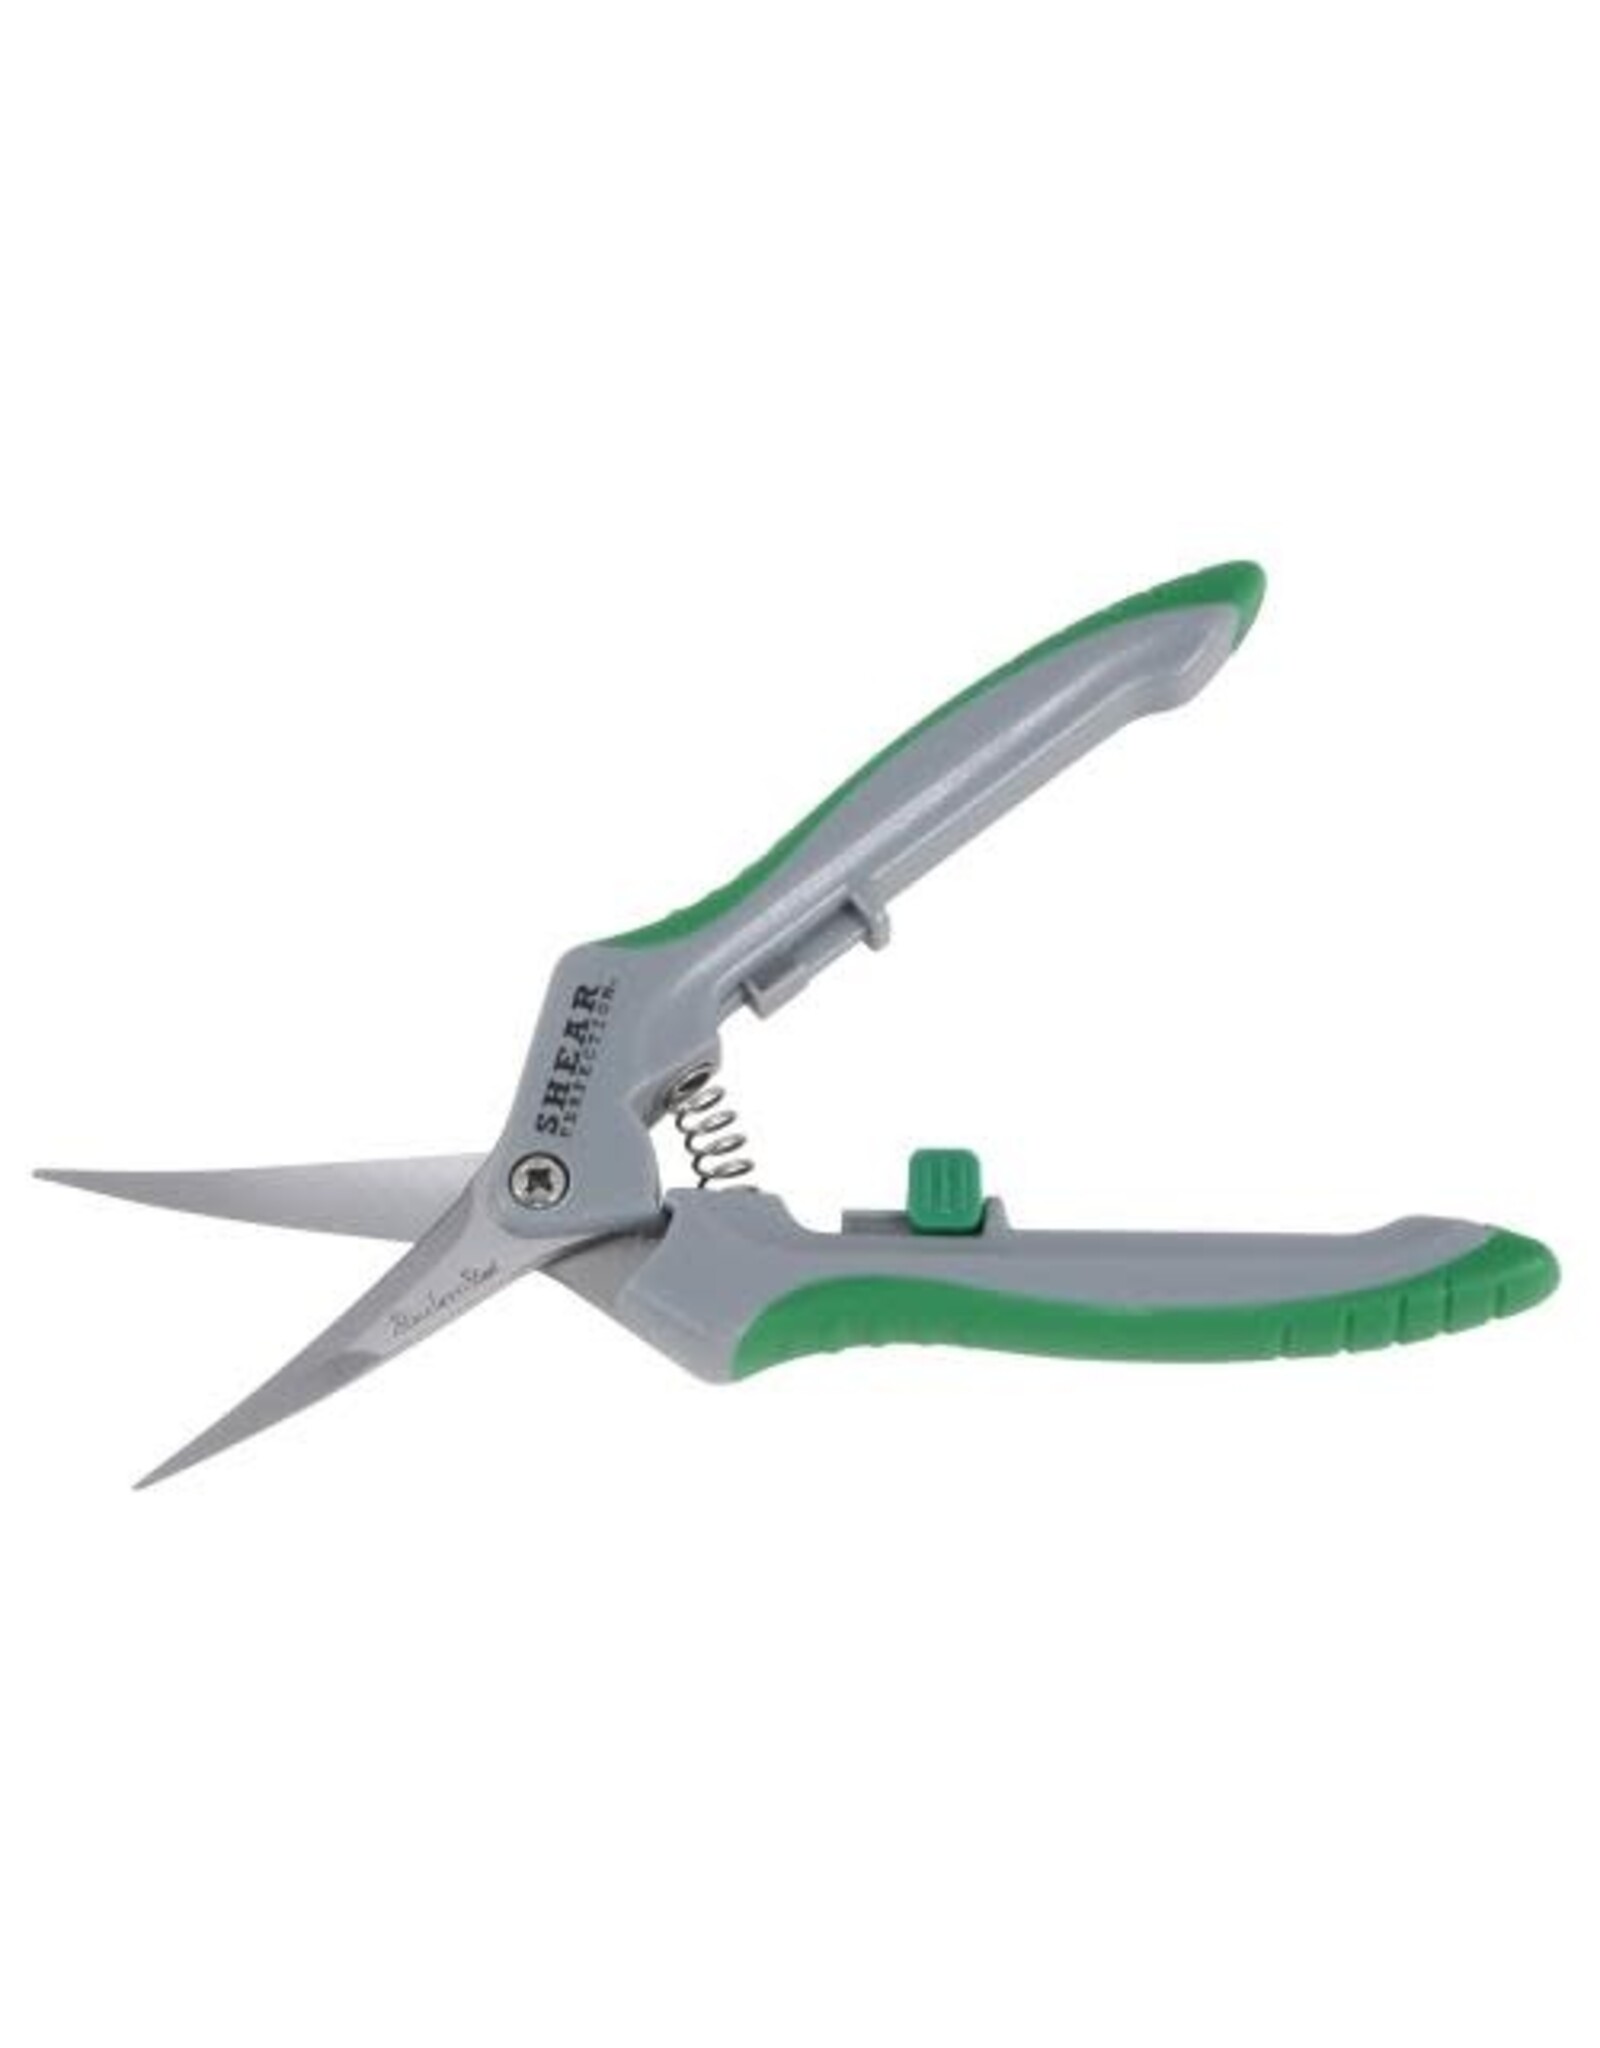 Shear Perfection Shear Perfection® Platinum Stainless Trimming Shear - 2 in Curved Blades